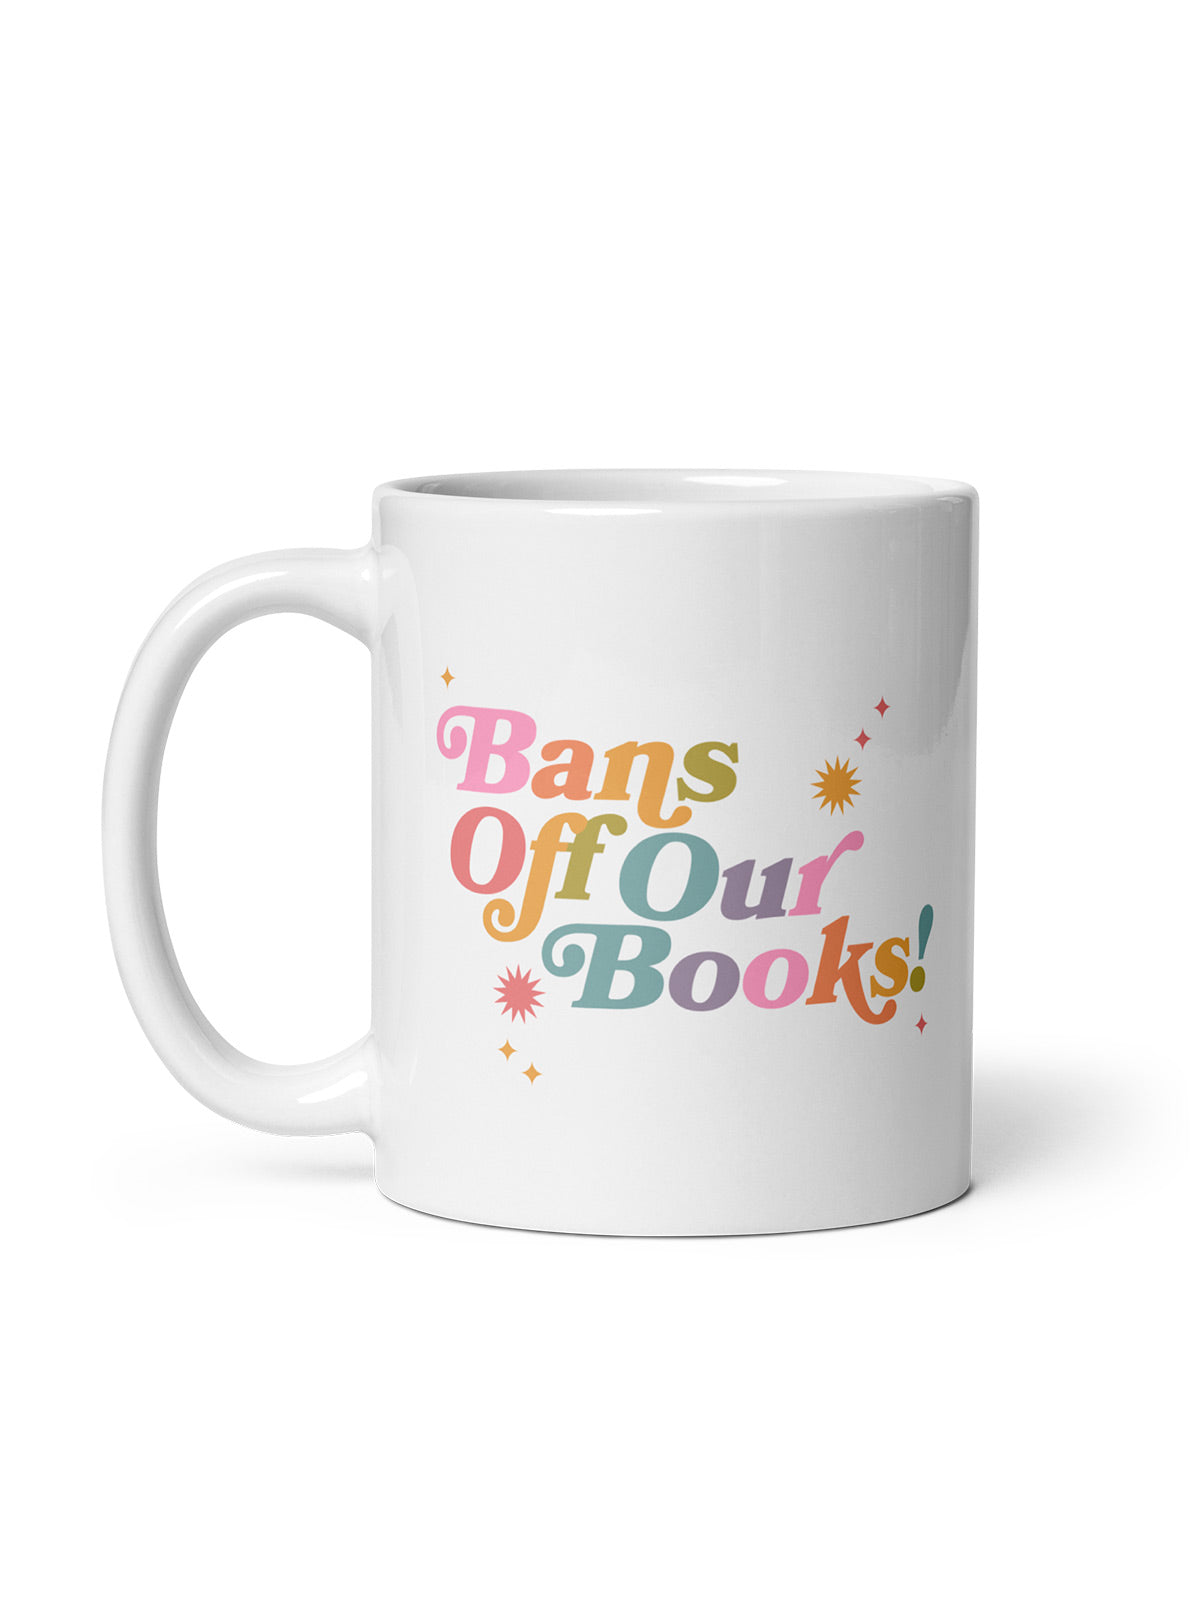 Bookish Mugs for Readers